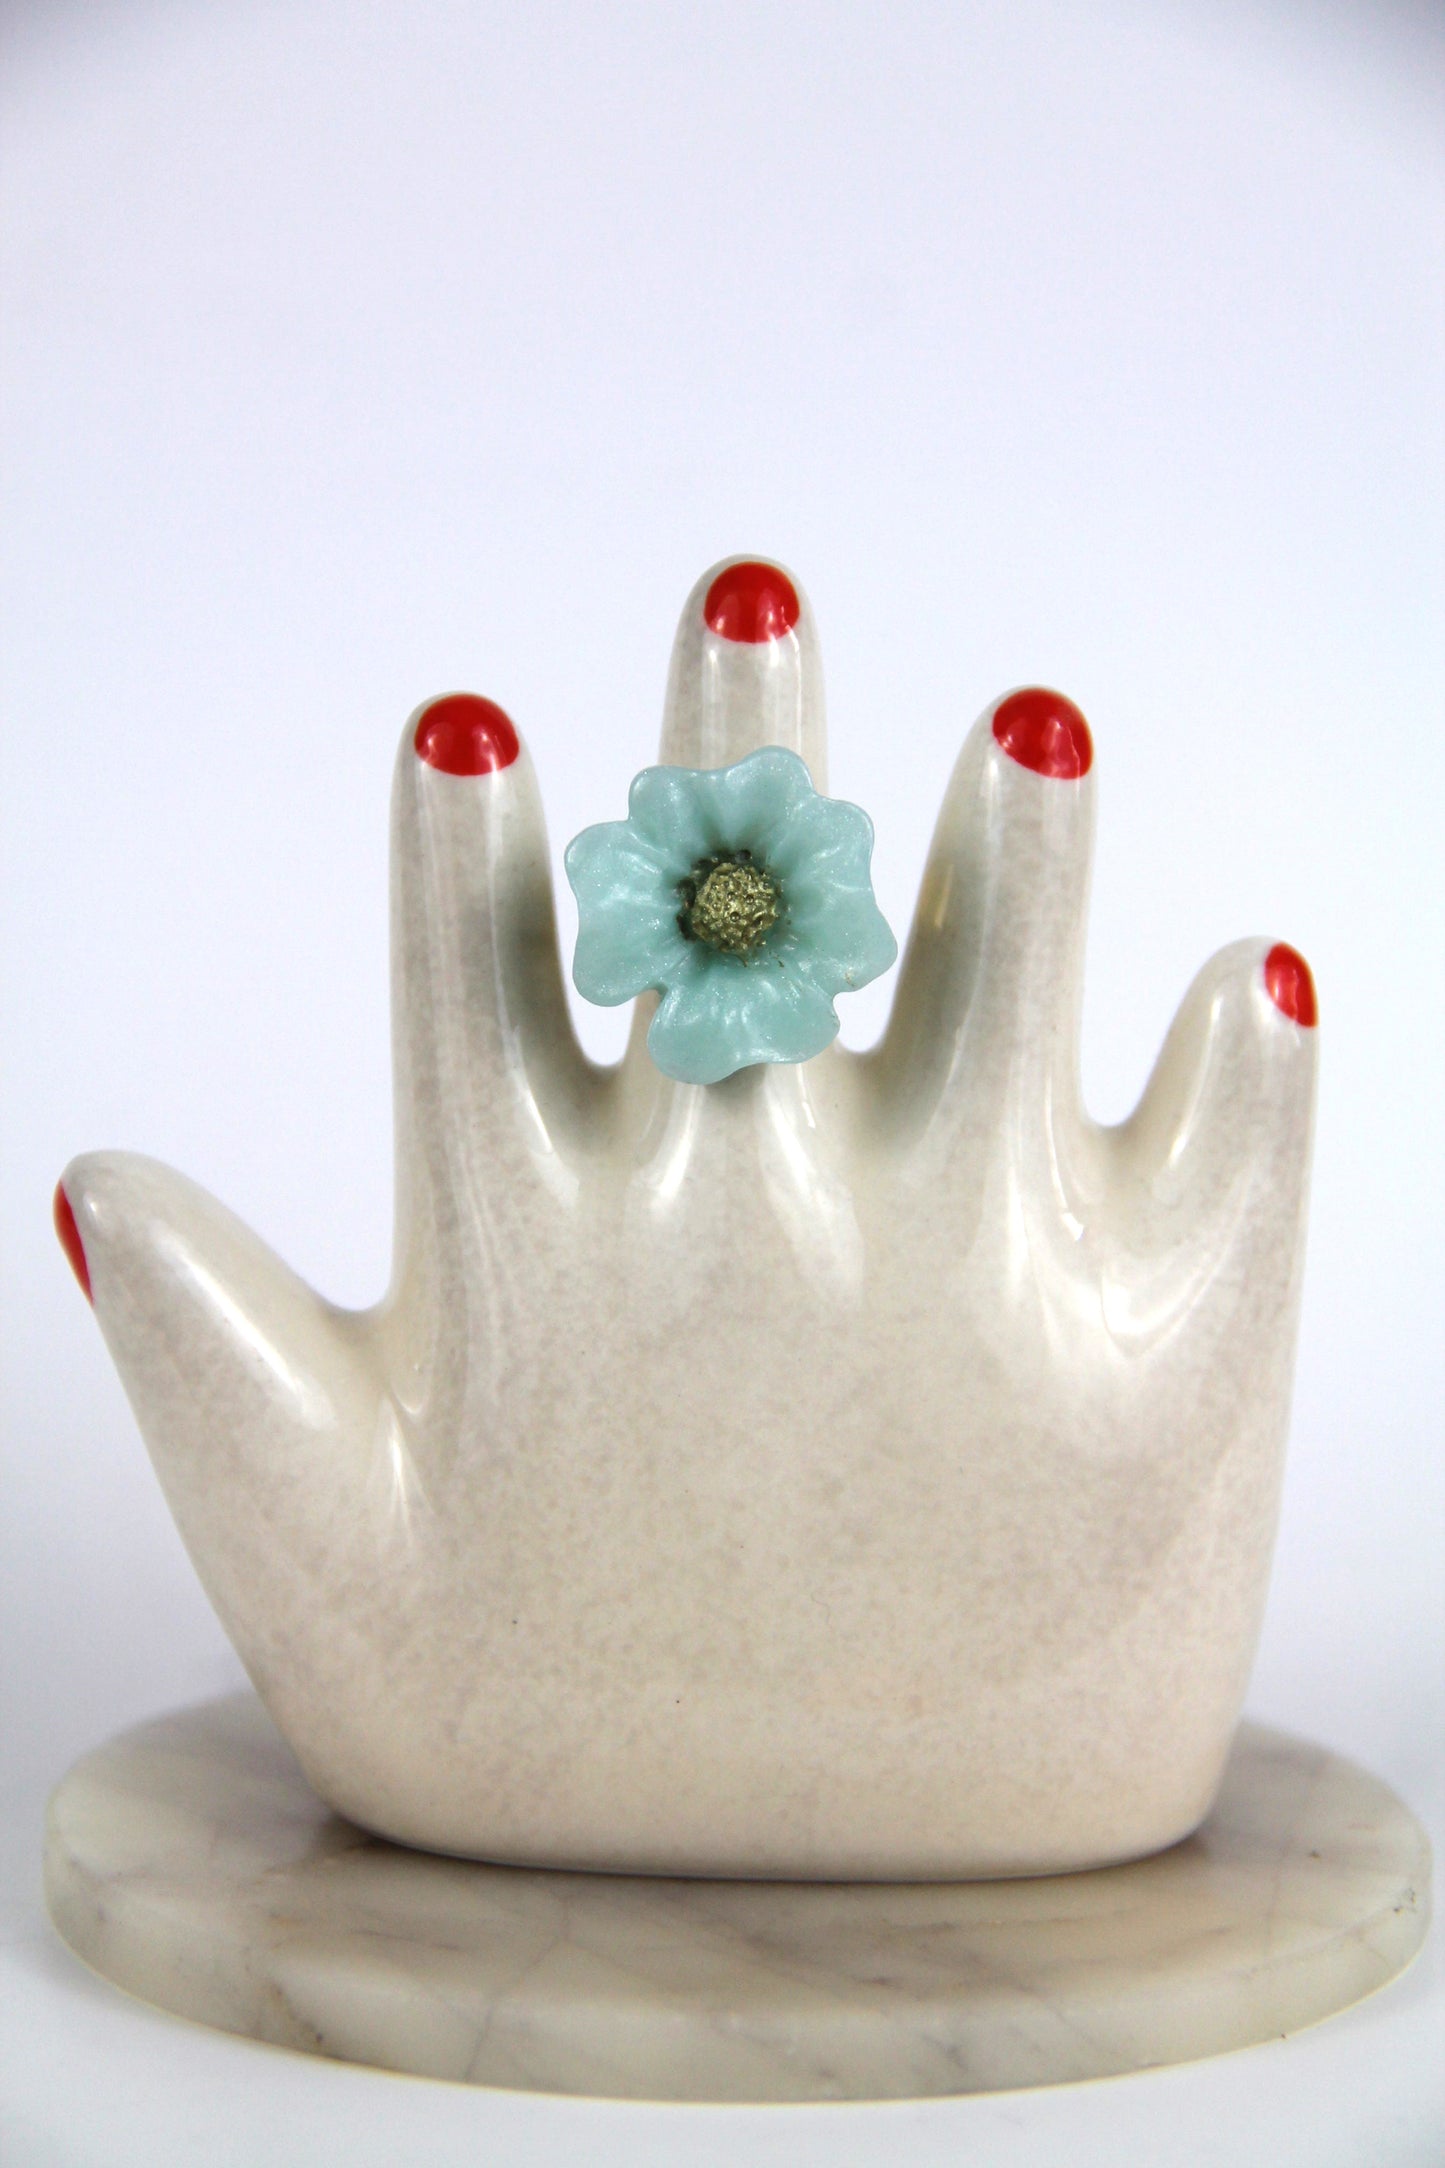 Flower Power ring - Fireweed - Pearly light blue